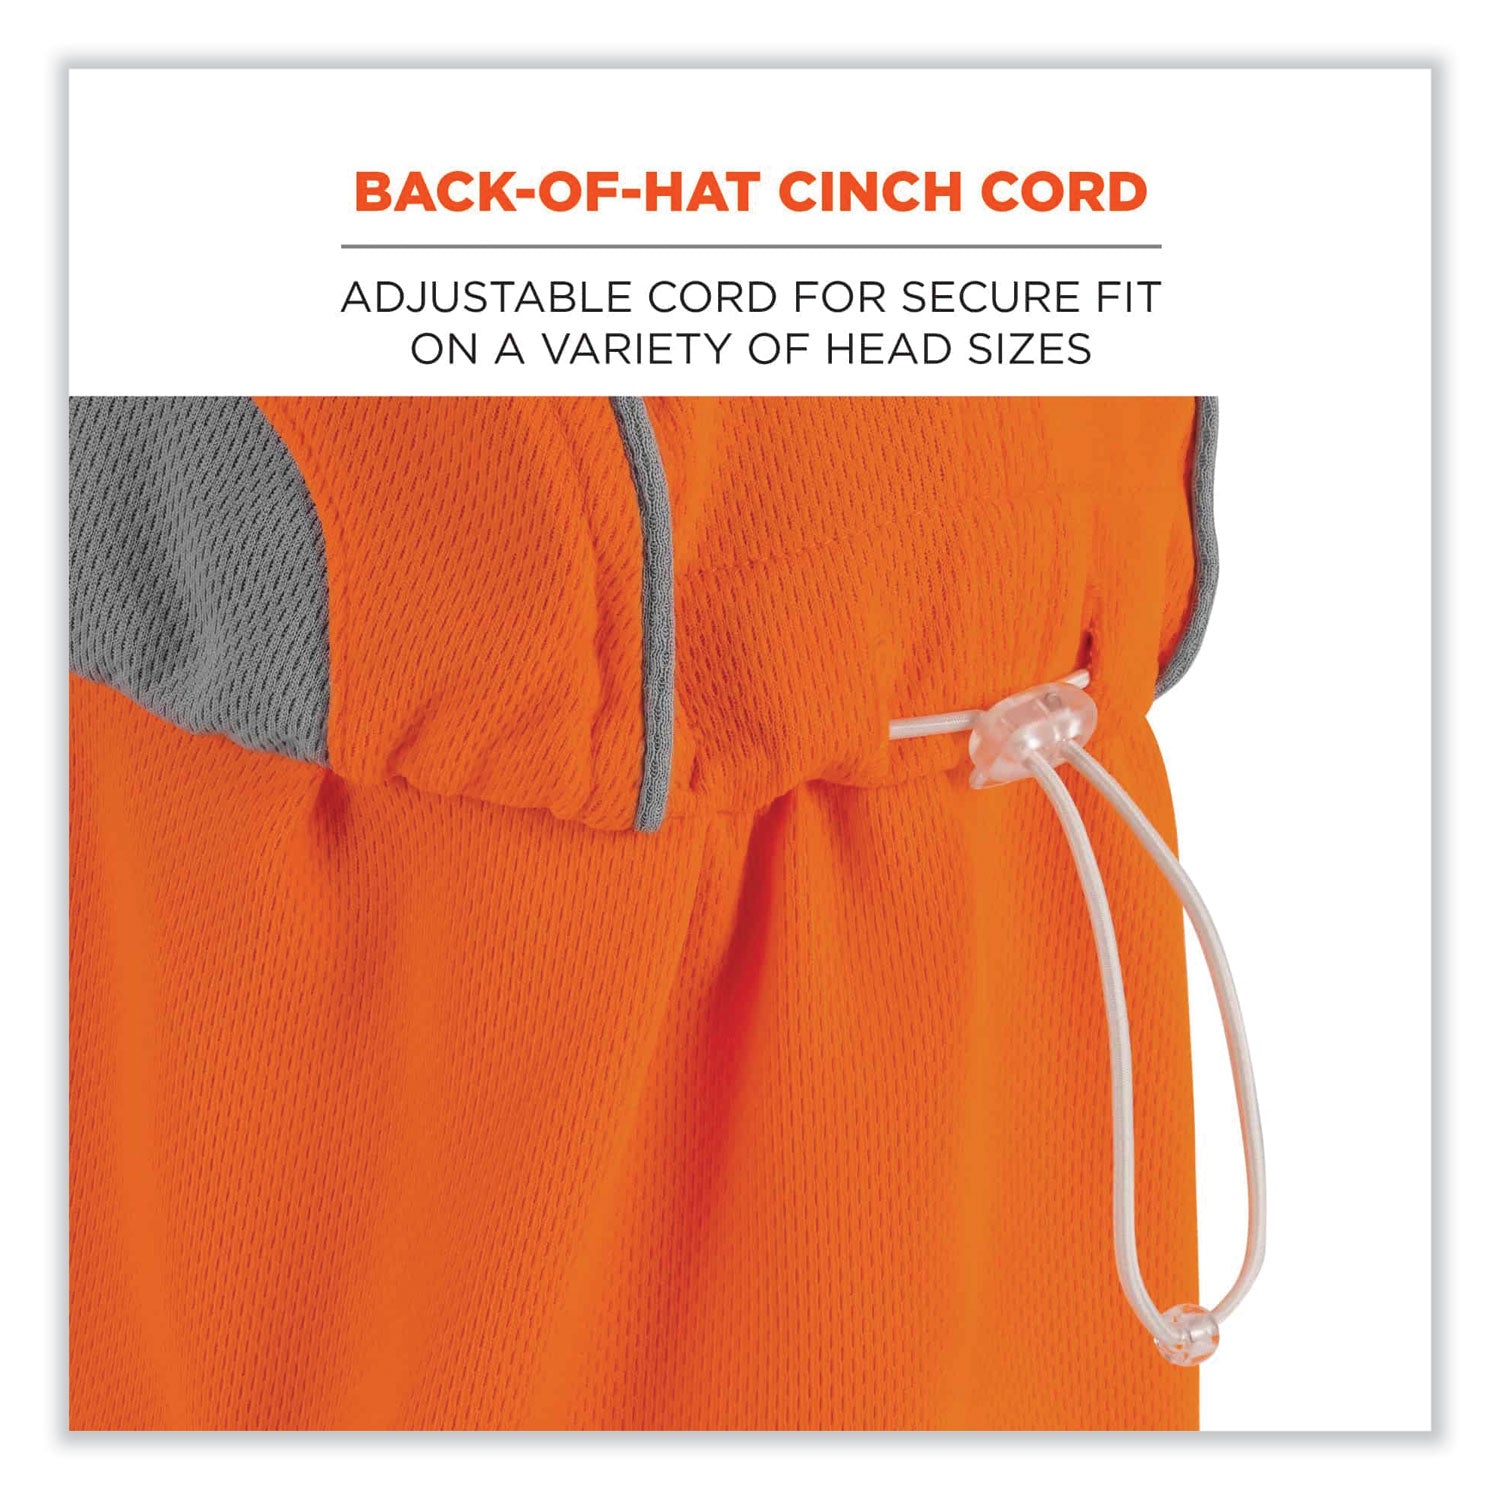 chill-its-6650-high-performance-hat-plus-neck-shade-polyester-one-size-fits-most-orange-ships-in-1-3-business-days_ego12521 - 7